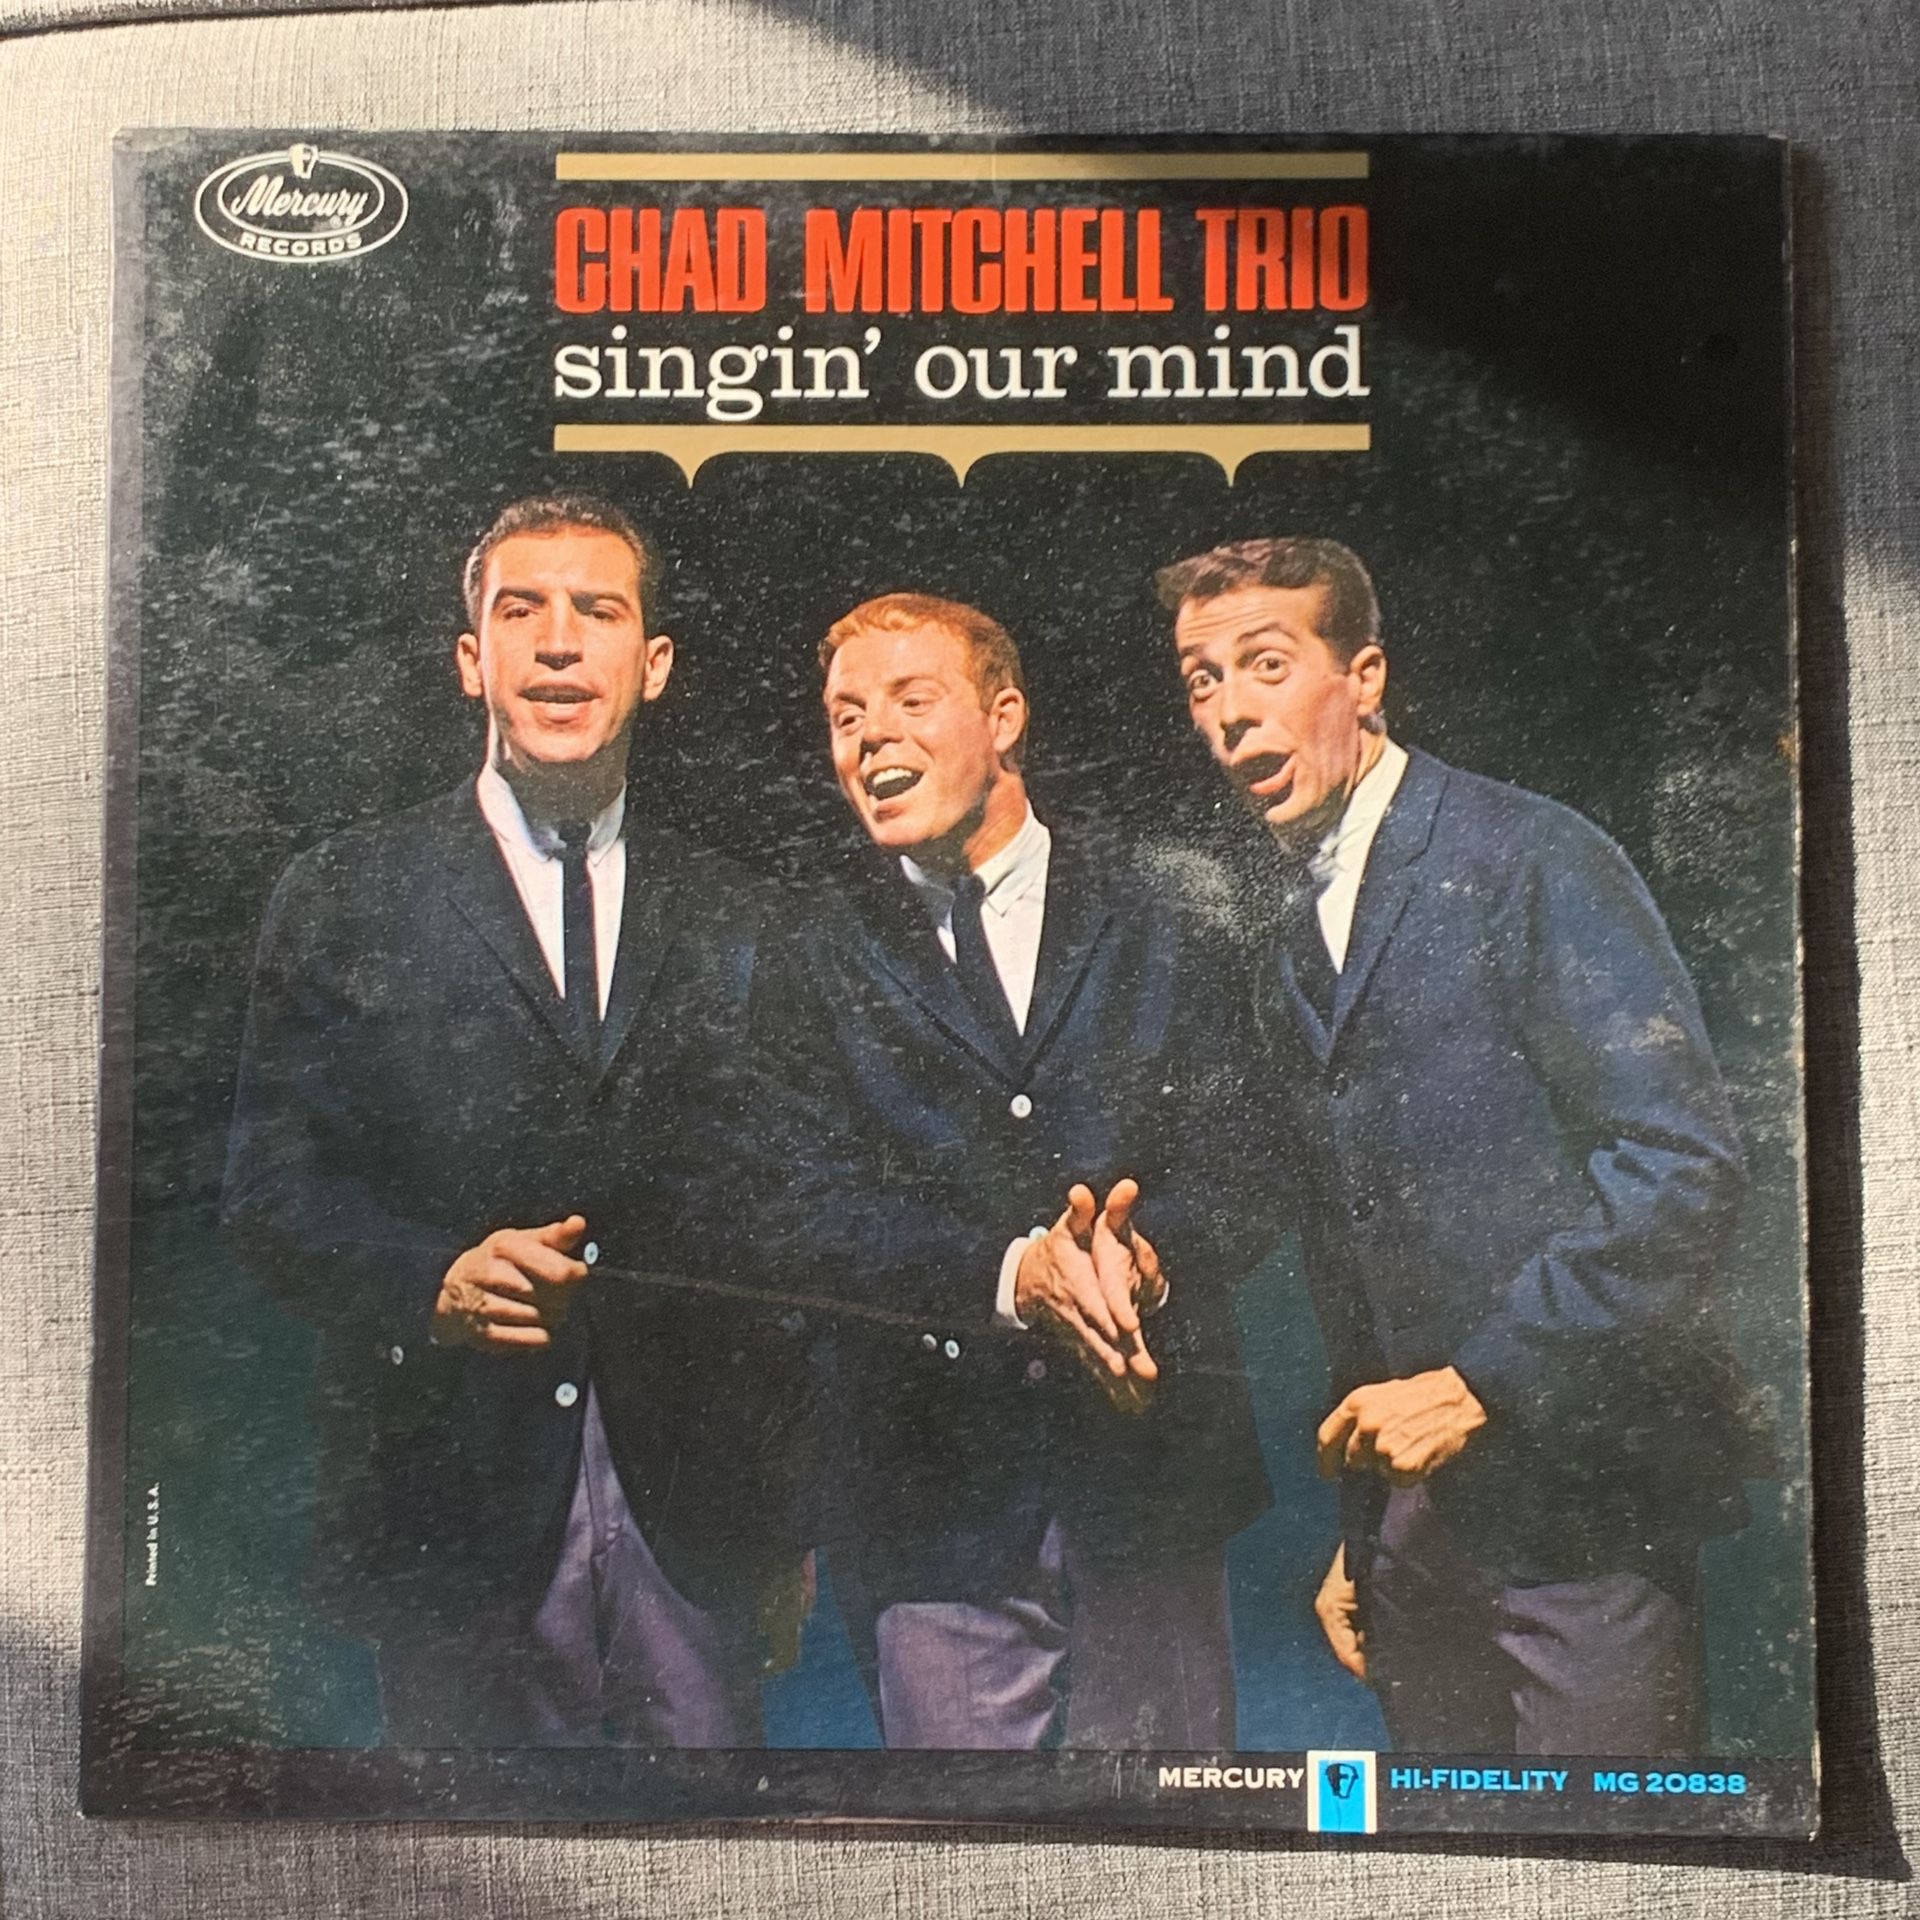 Vinyl Record: Chad Mitchell Trio Singing’ Our Mind